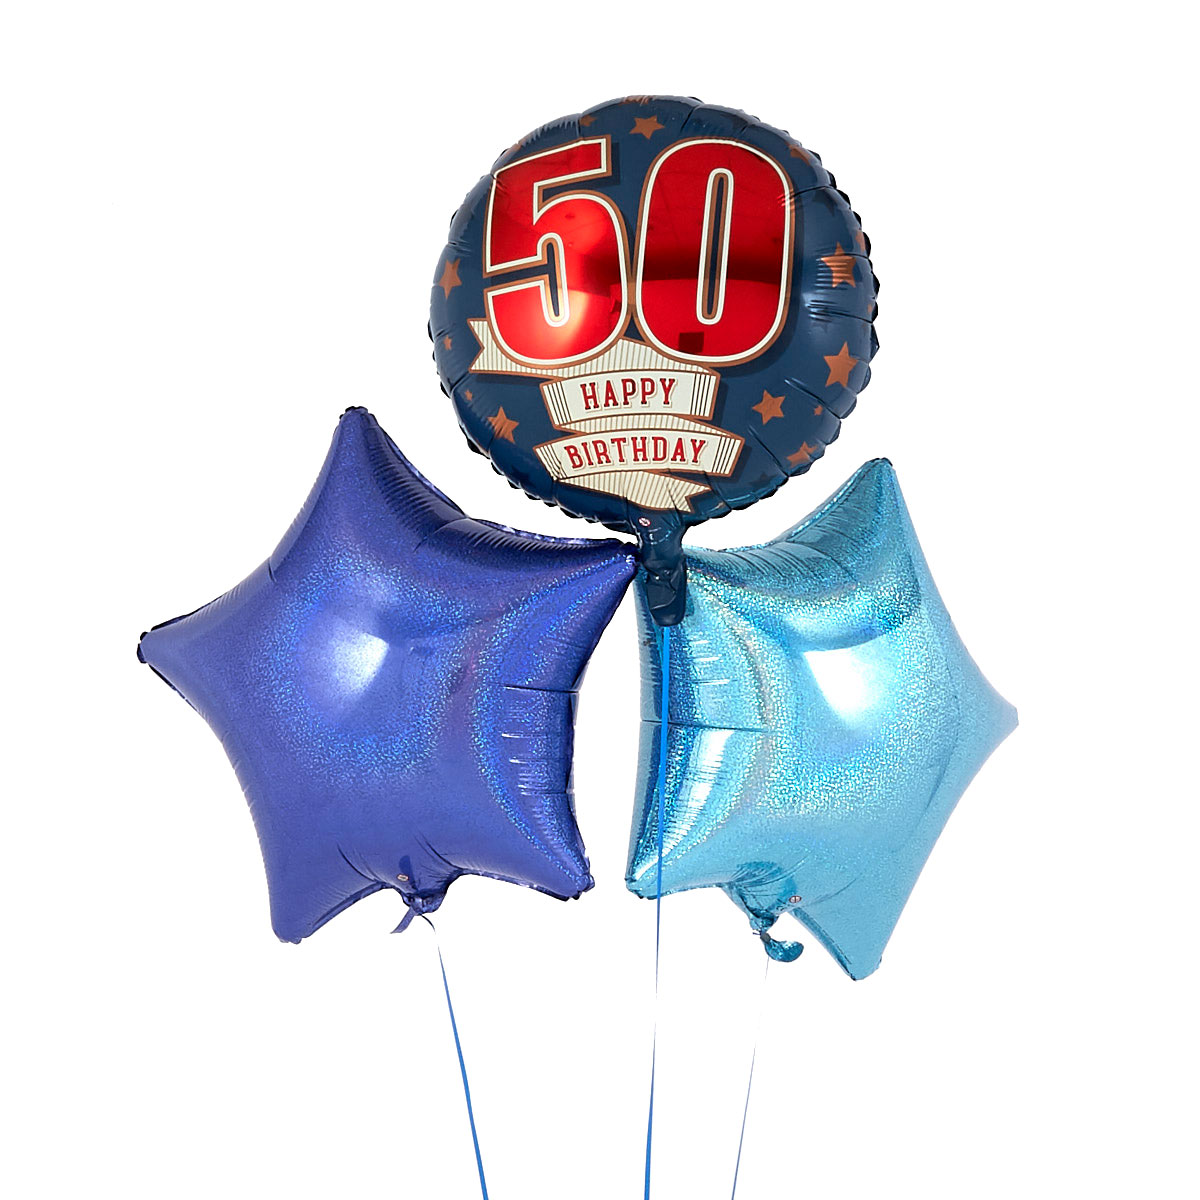 50th Birthday Blue Balloon Bouquet - DELIVERED INFLATED!